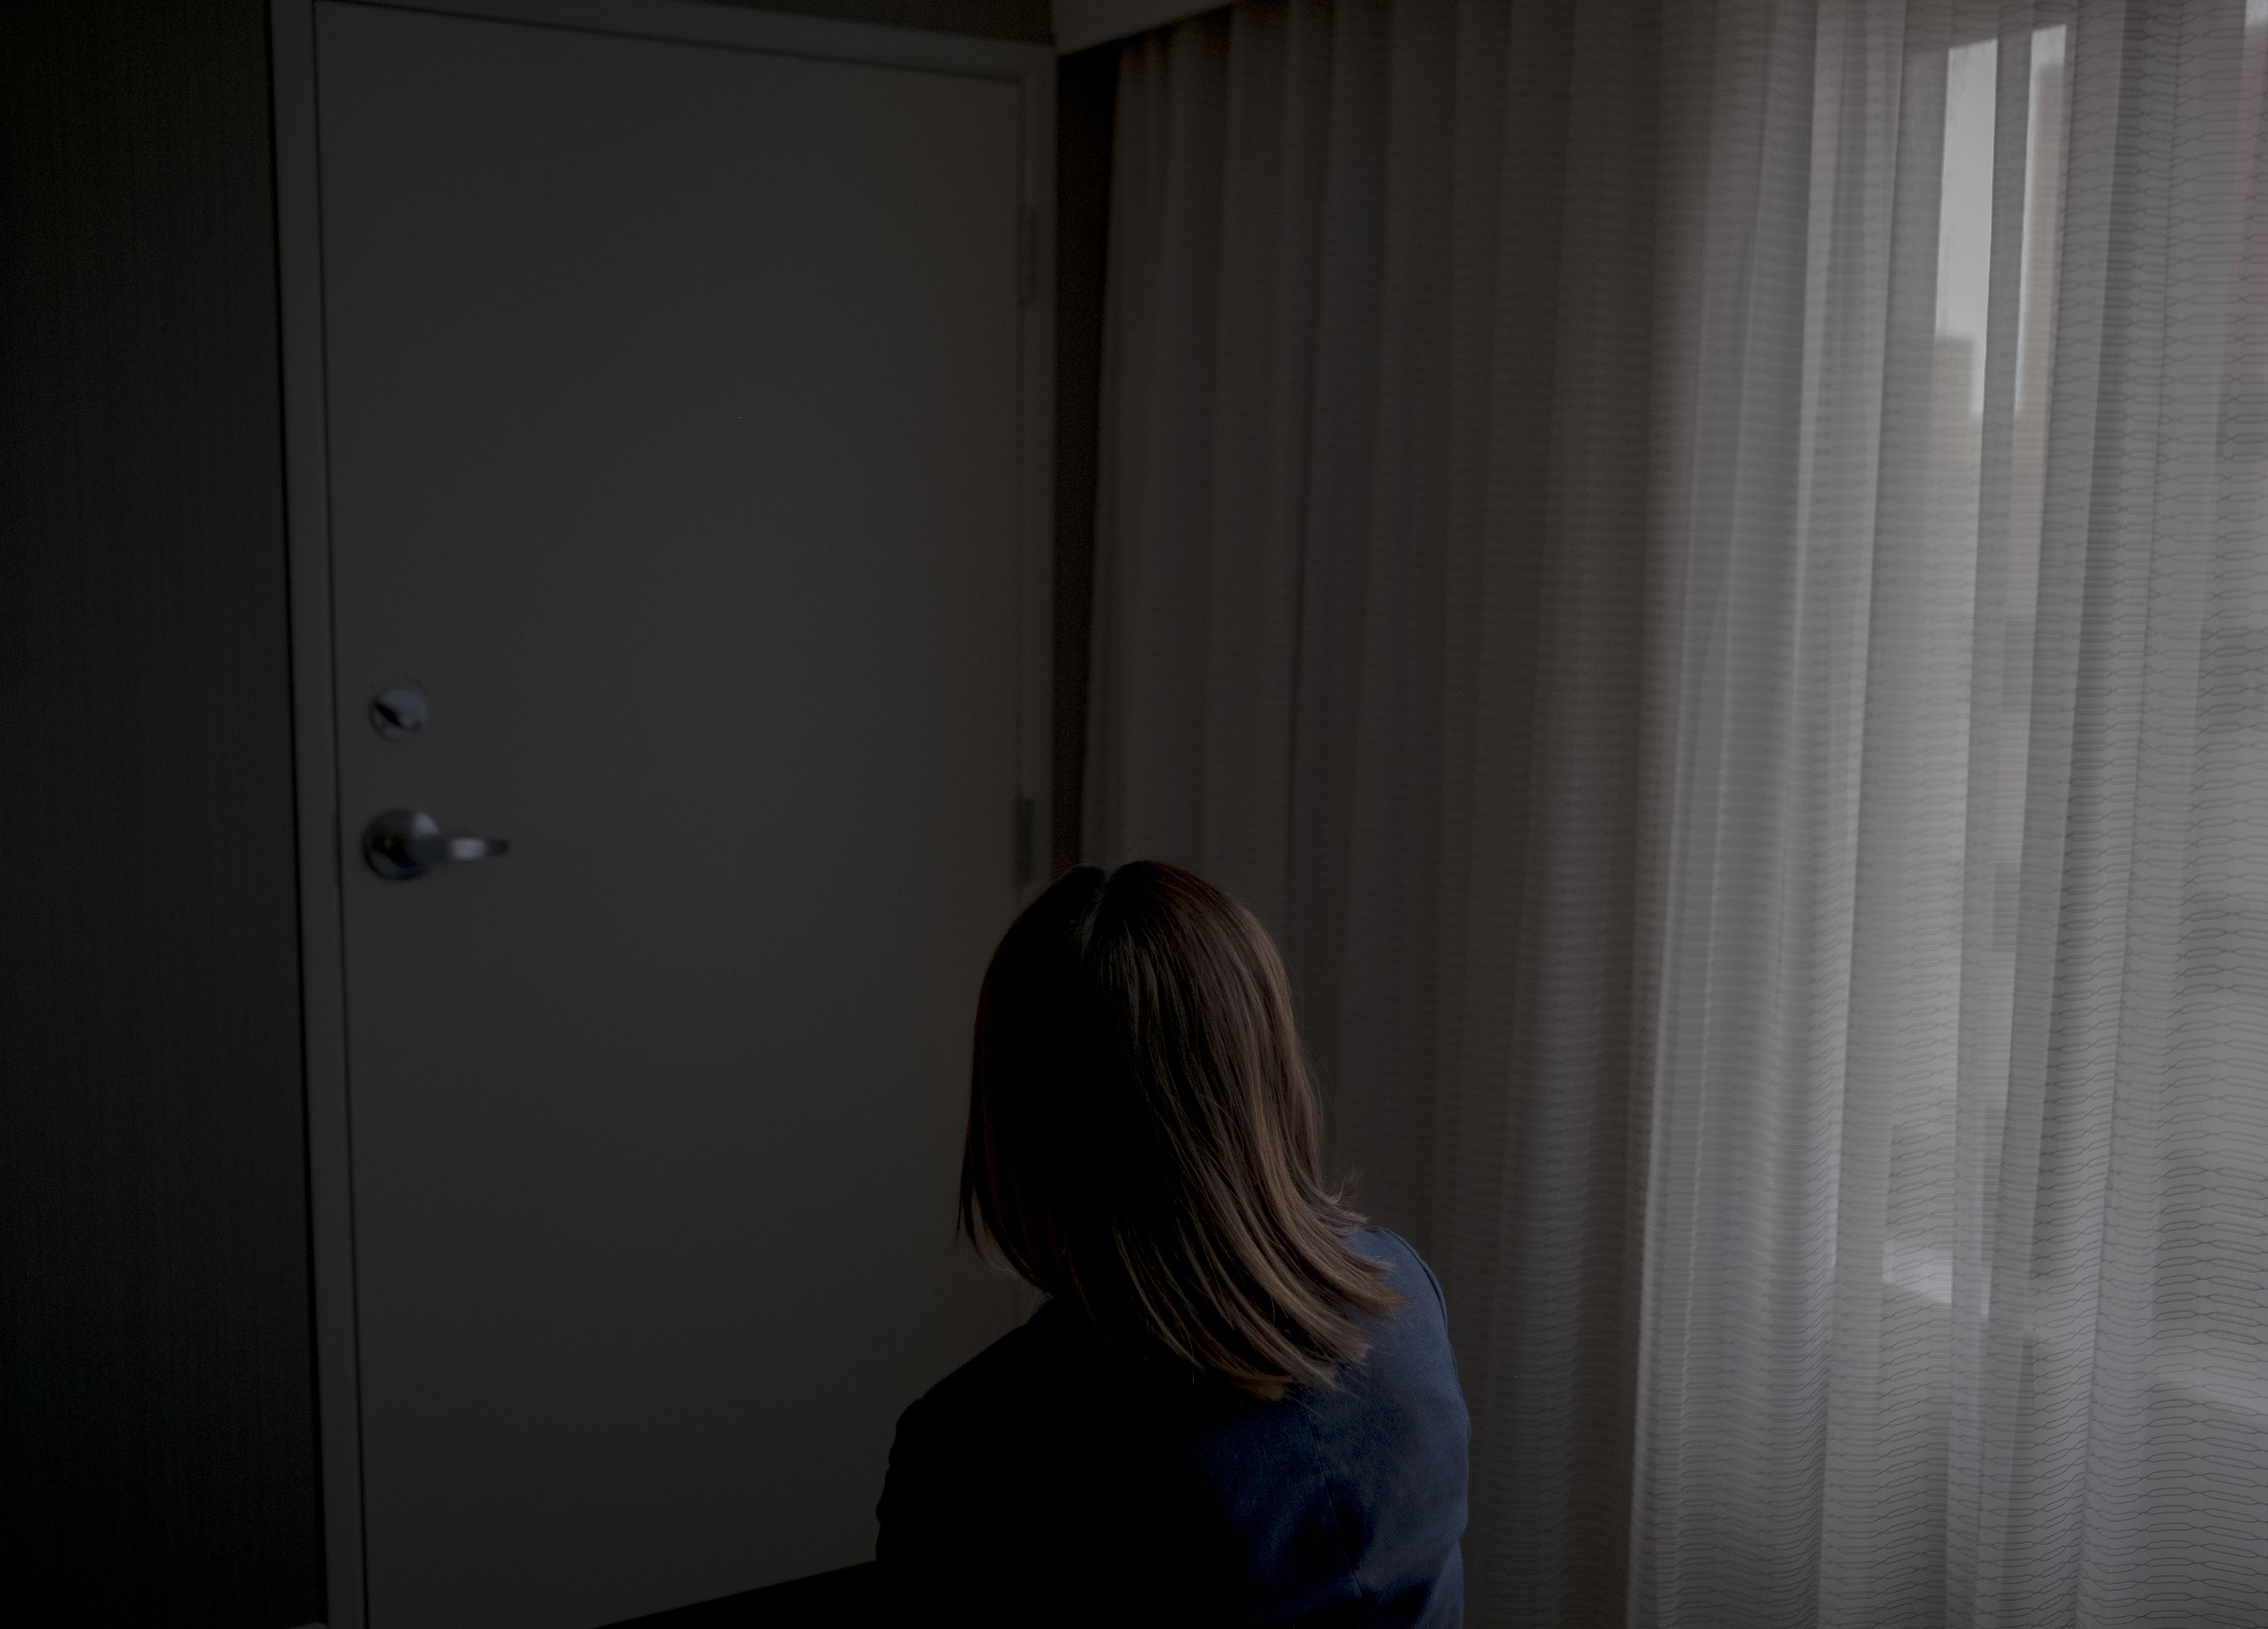 Emma, a human trafficking survivor from China, in a hotel room in Gaithersburg, MD on Feb. 25, 2020. (Gabriella Demczuk for TIME)